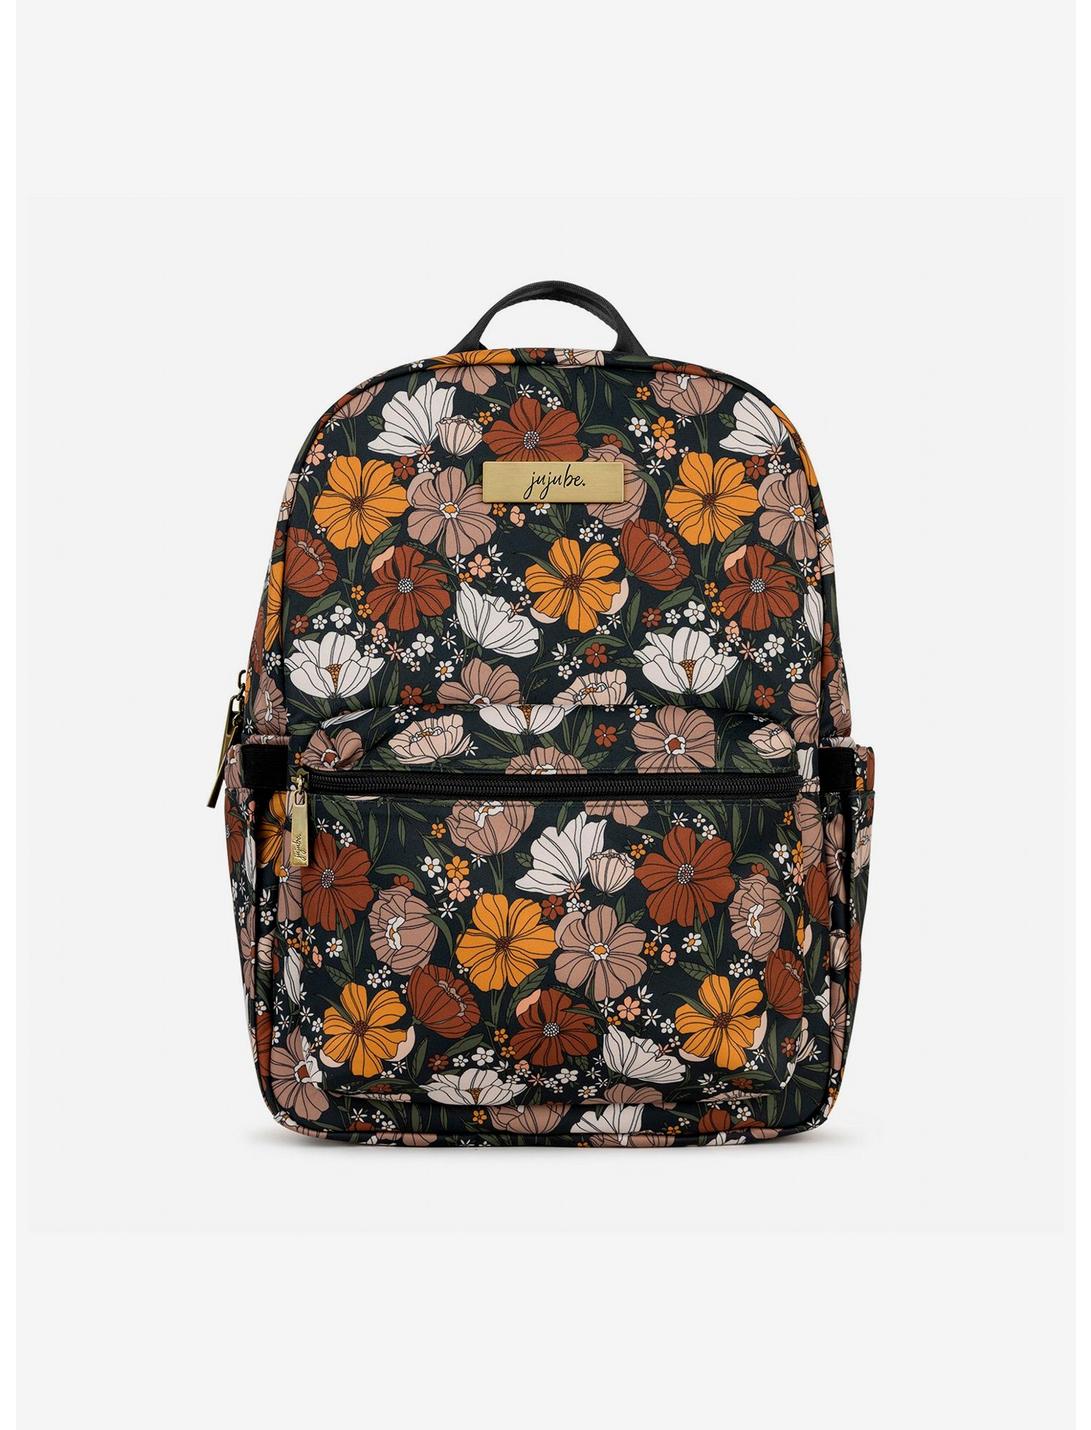 JuJuBe Far Out Floral Midi Backpack, , hi-res